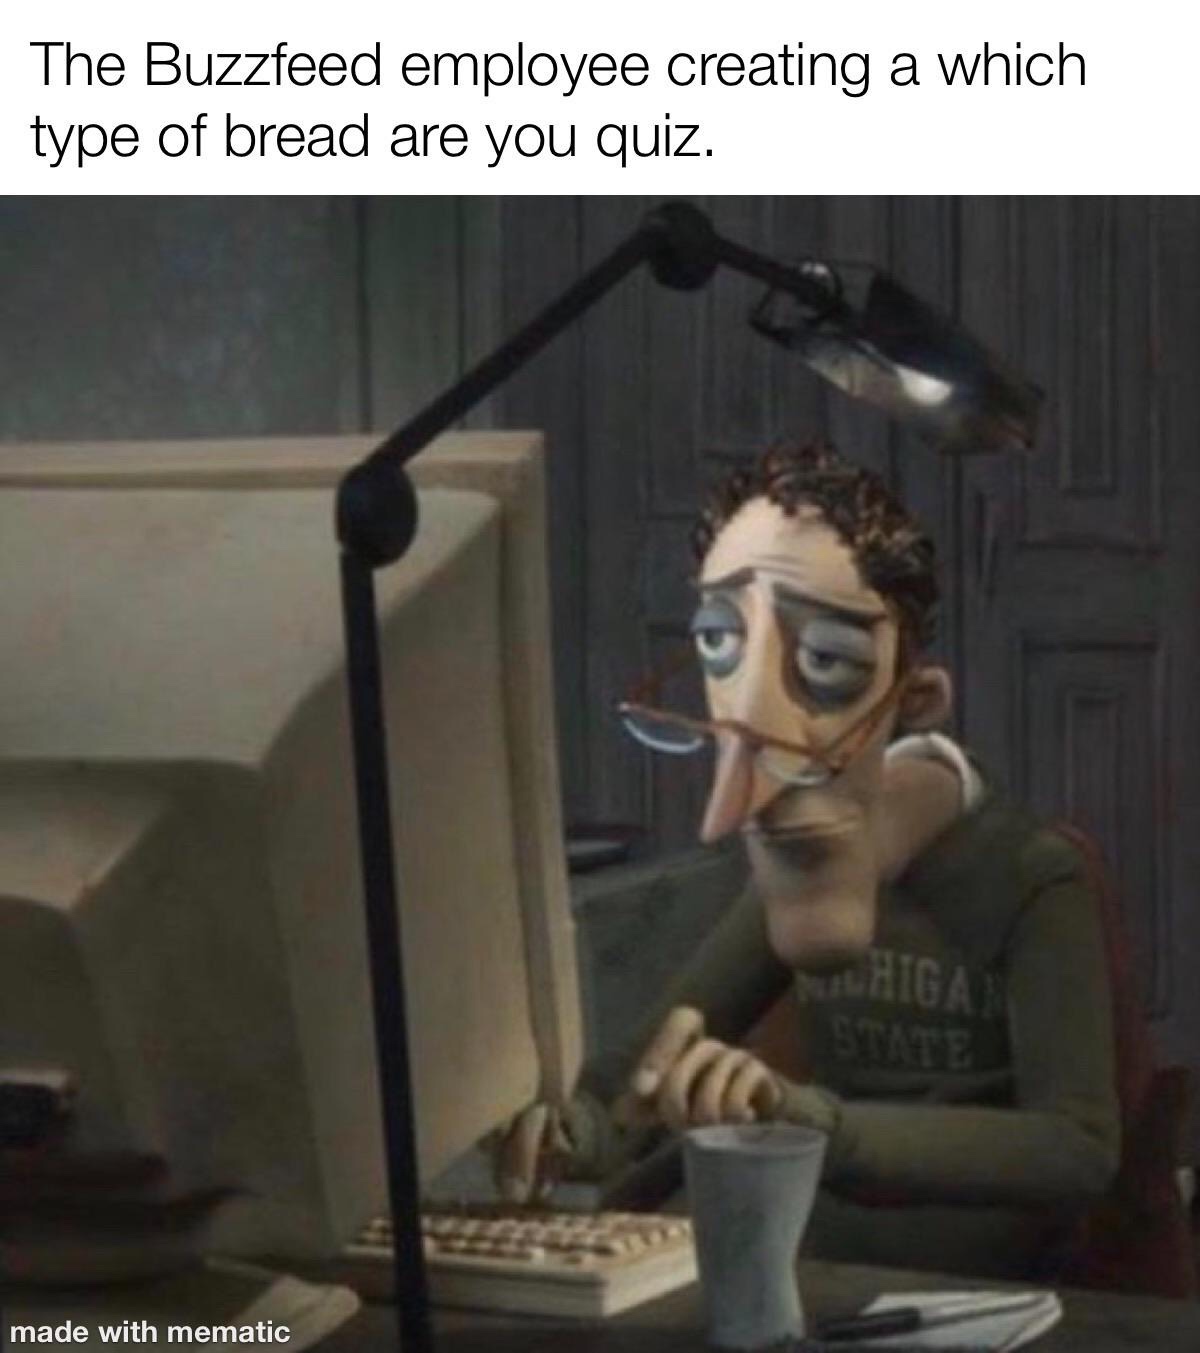 charlie jones on the computer meme - The Buzzfeed employee creating a which type of bread are you quiz. Srce Higa State made with mematic